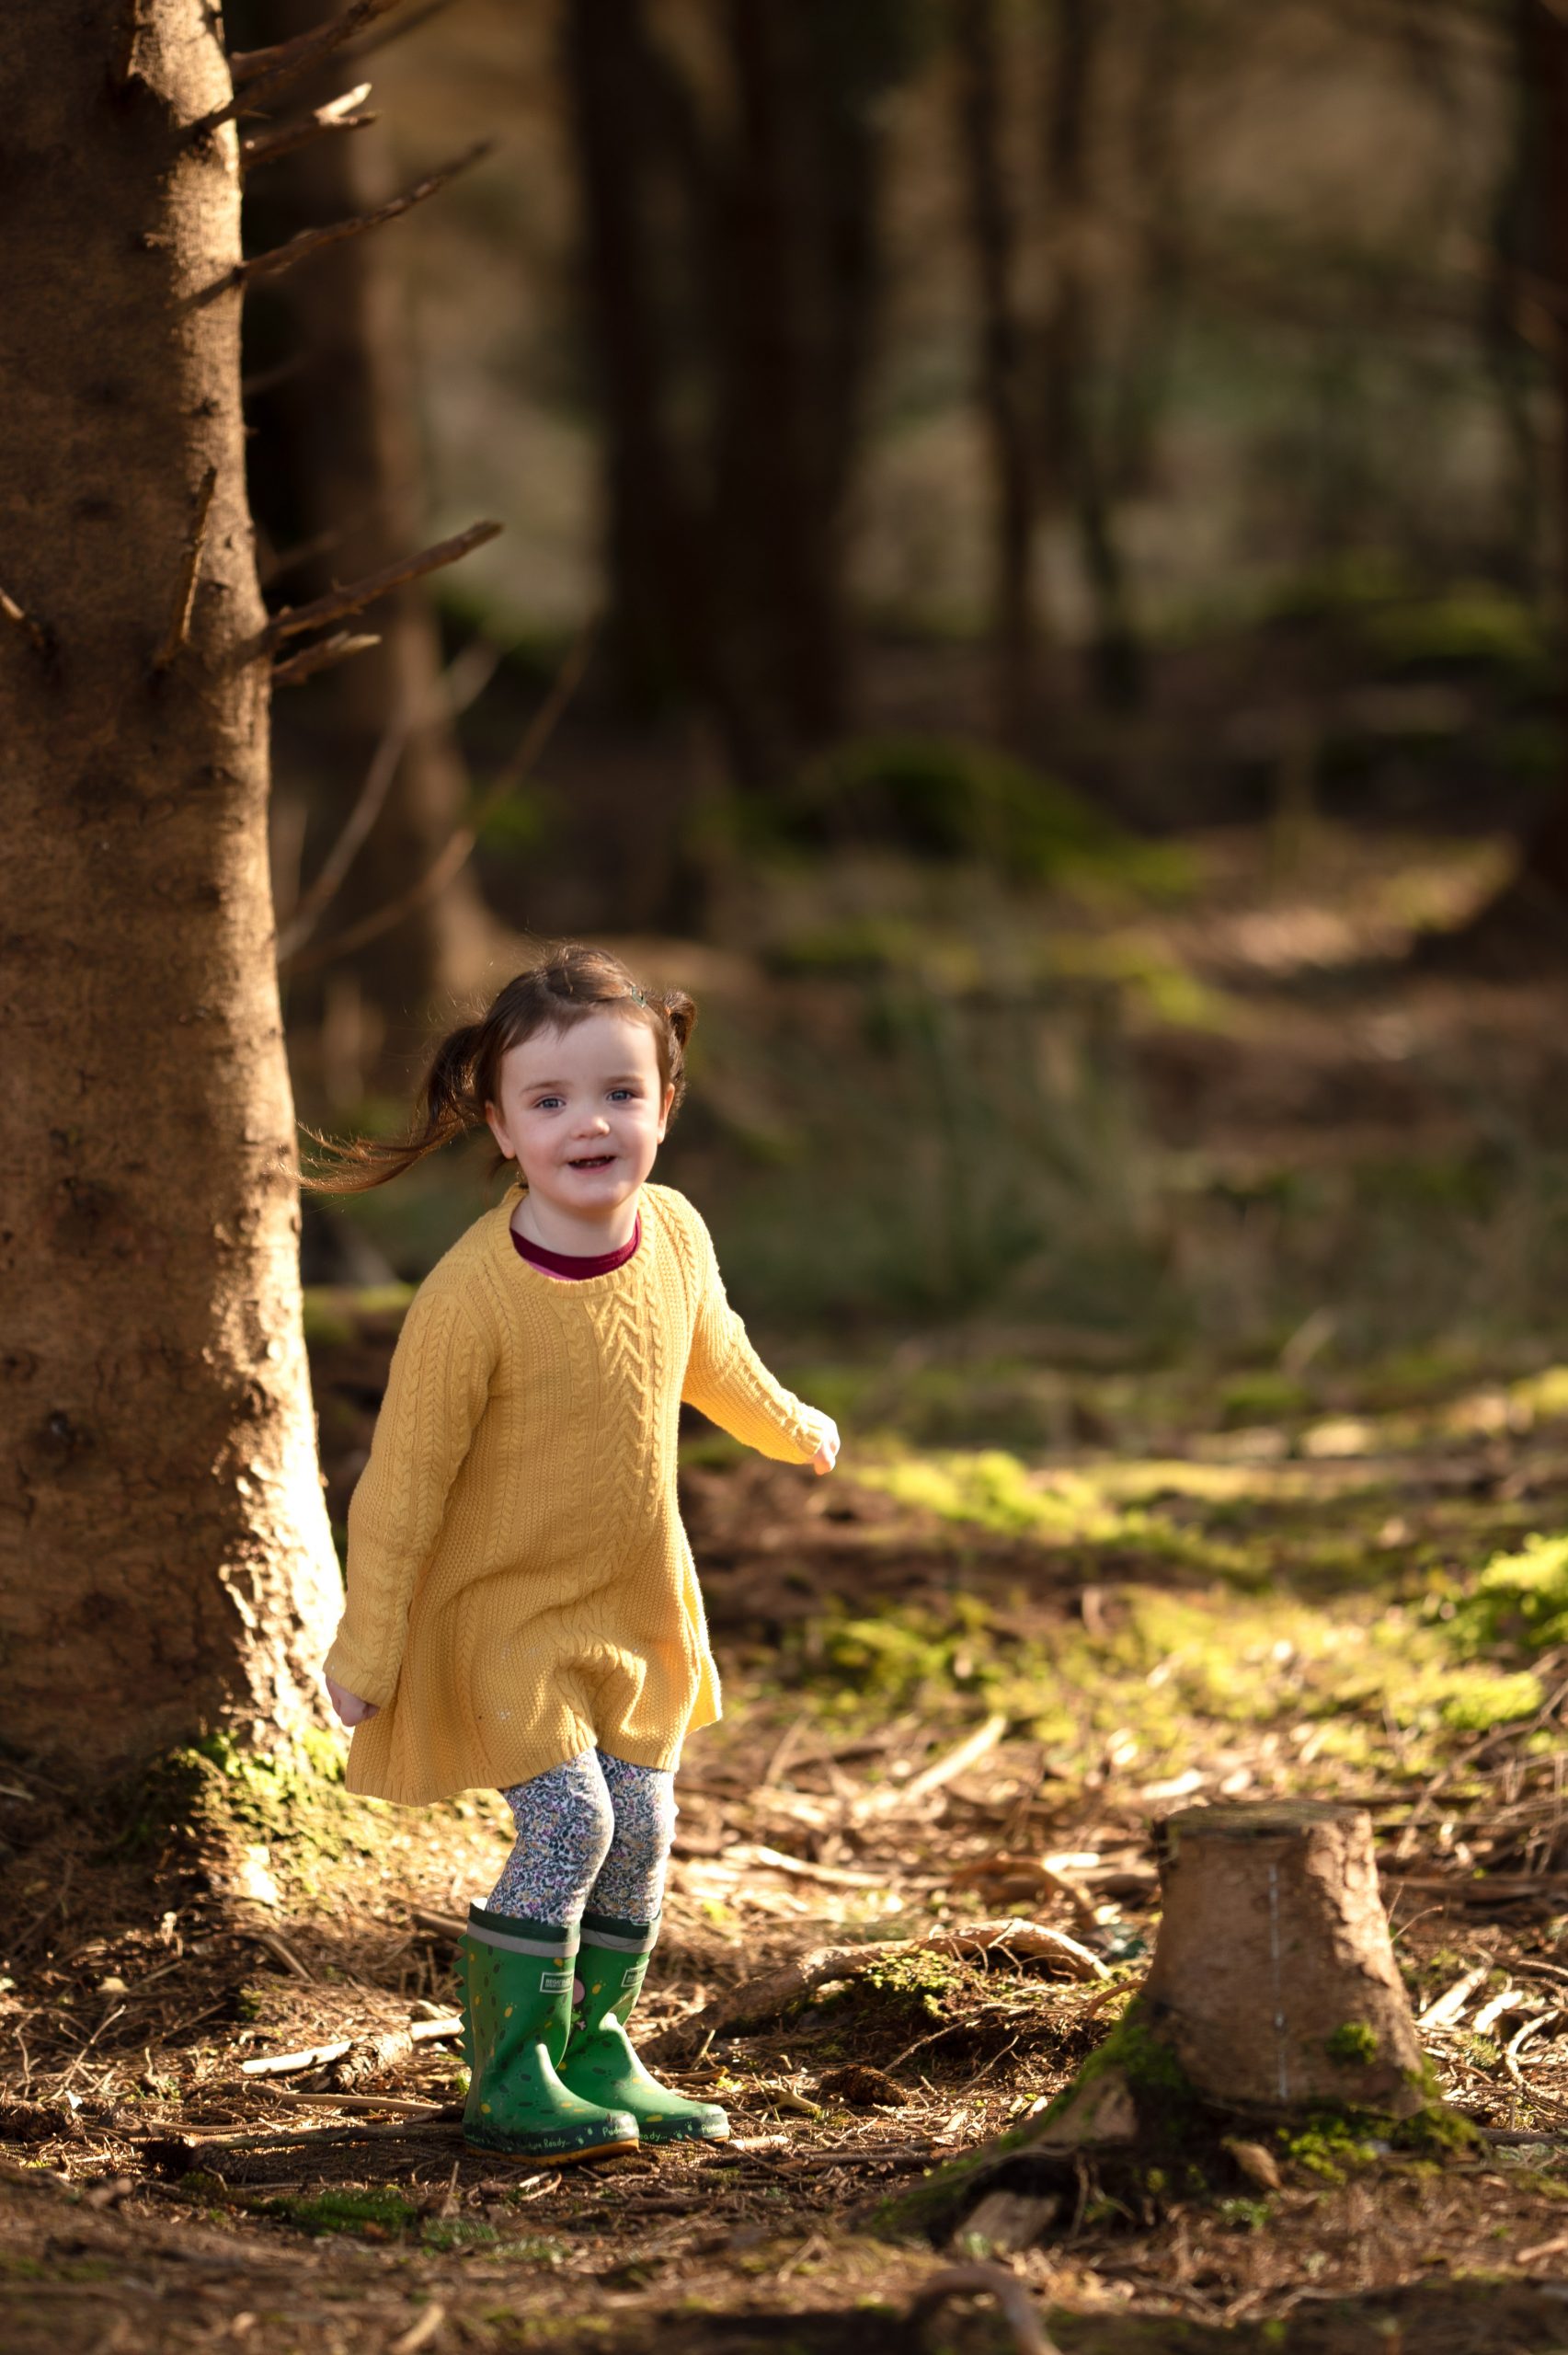 Child photograph in forest in Center Parcs